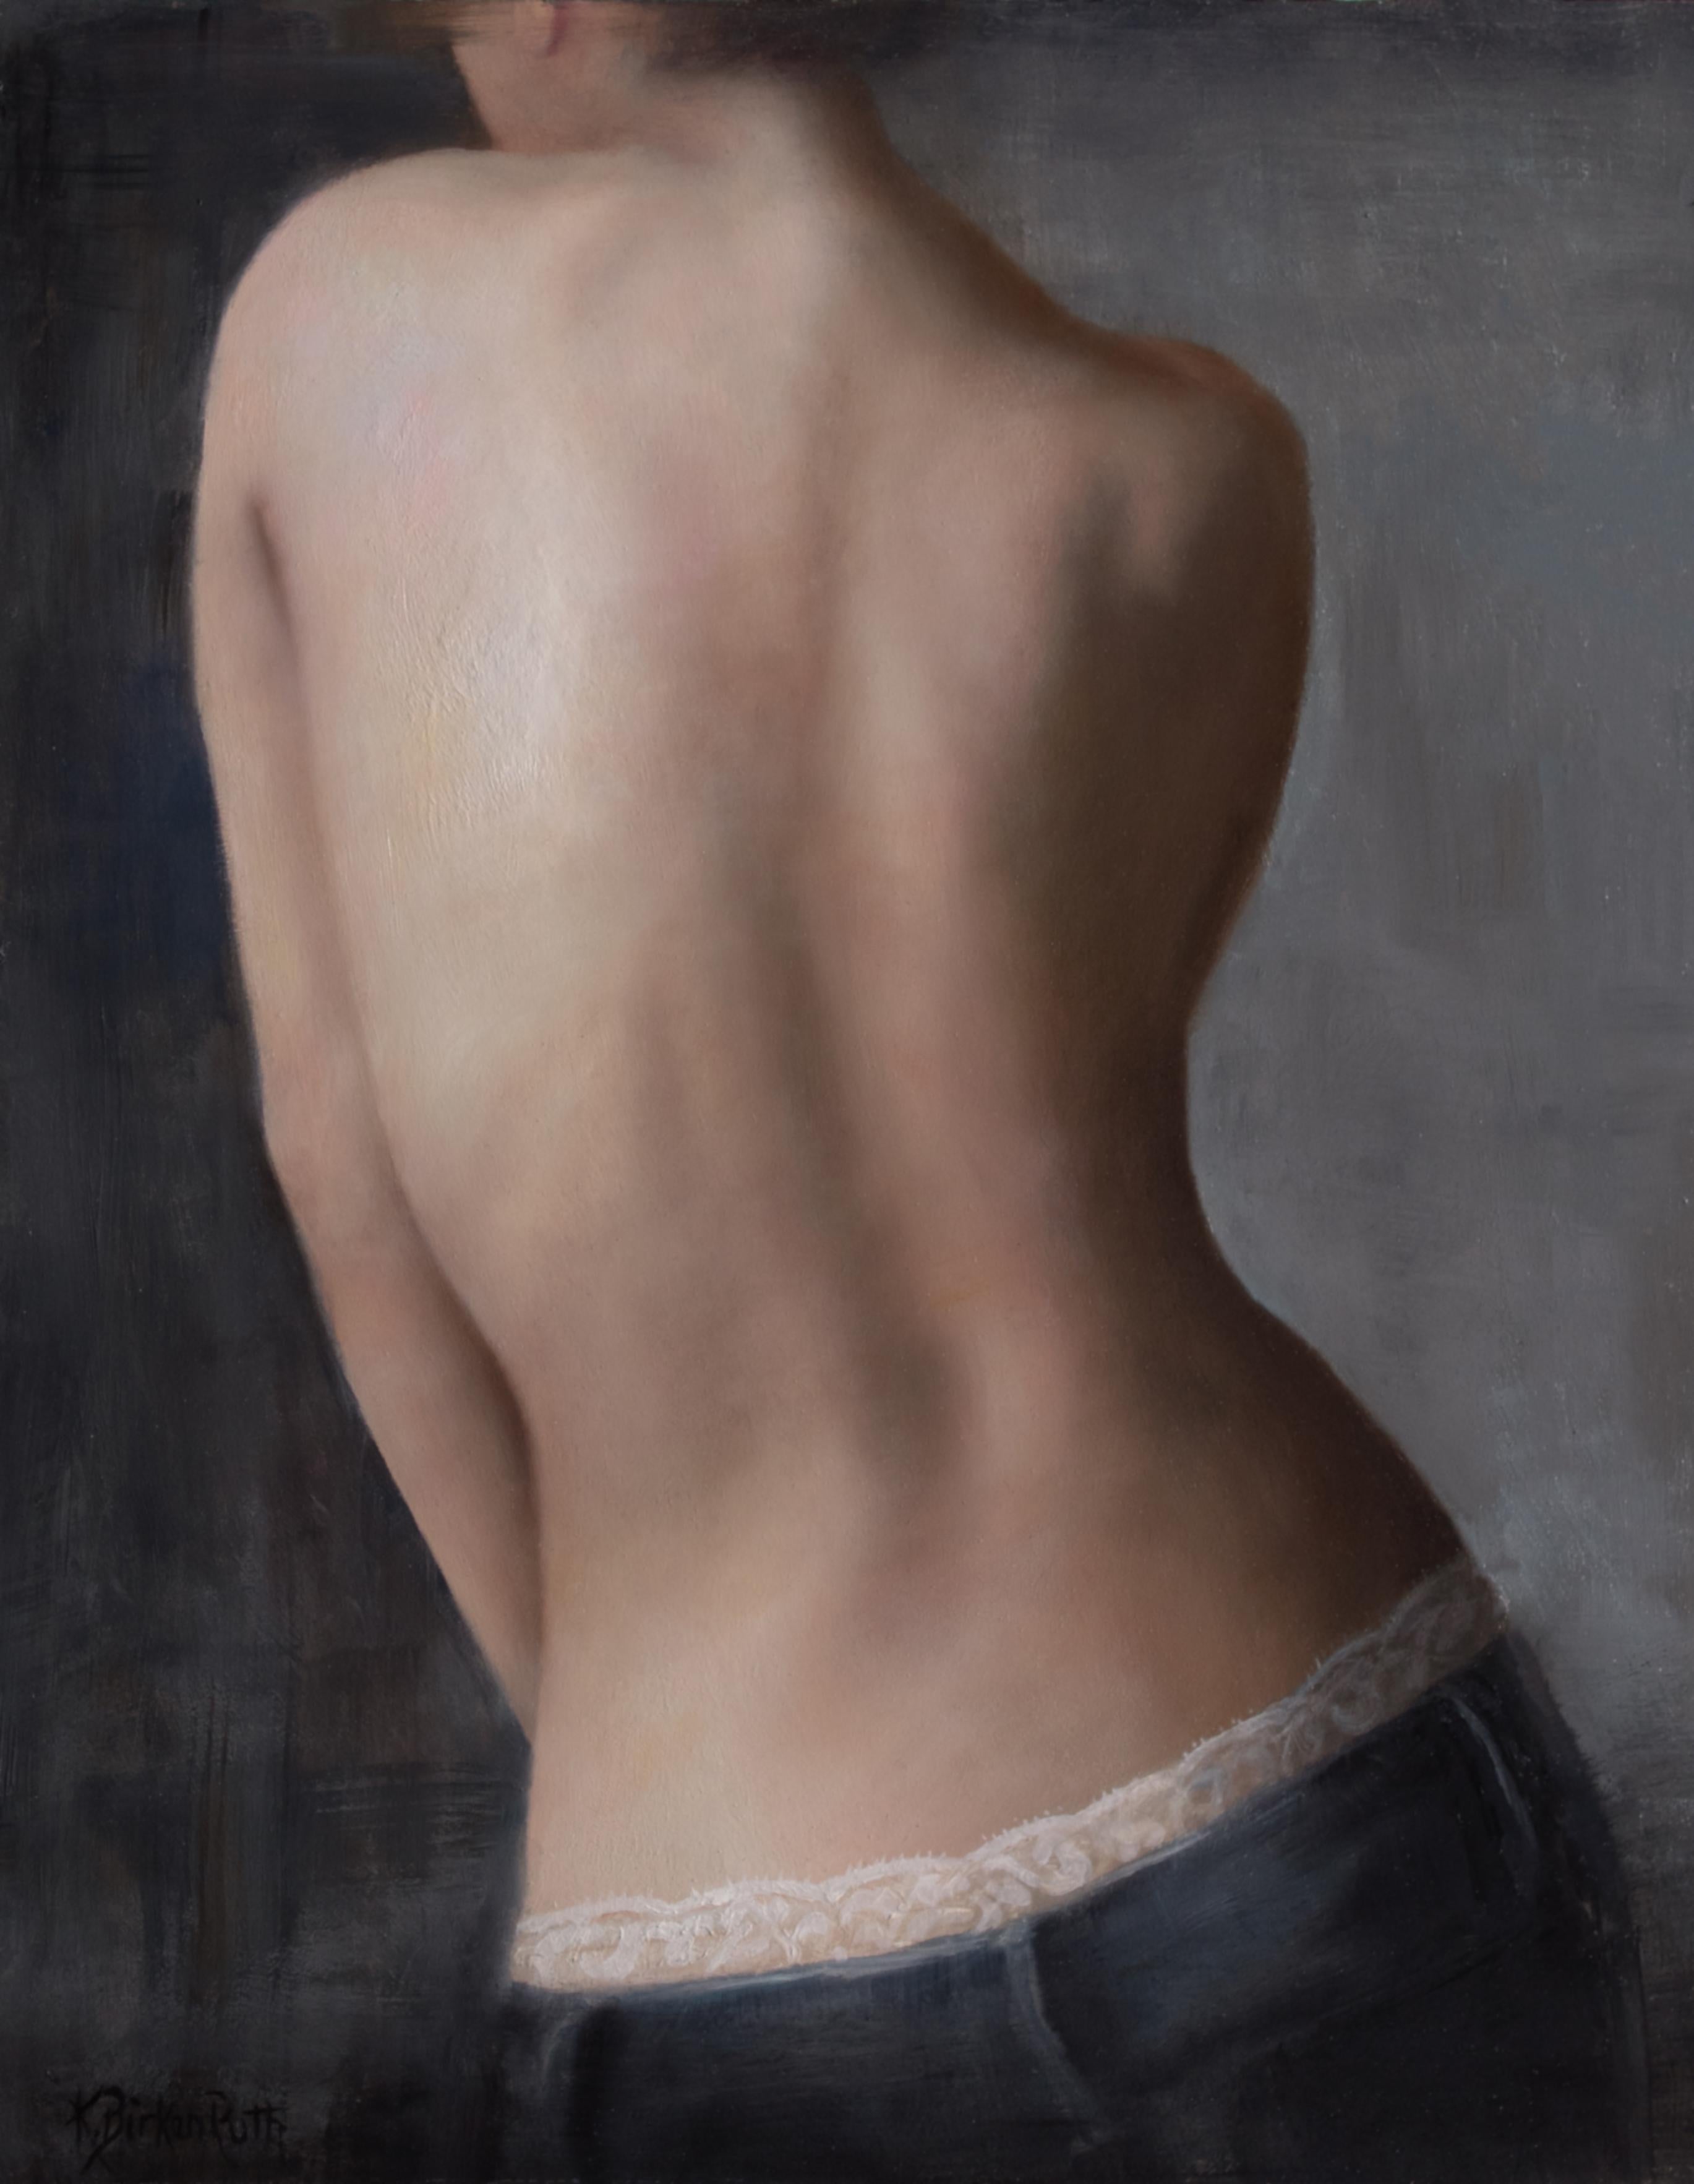 Kelly Birkenruth's "Eve" (2024) is an original oil painting on panel, measuring 14 x 11 x 2 inches. This exquisite artwork features a detailed portrayal of a female back, capturing the soft curvature and delicate play of light and shadow on the